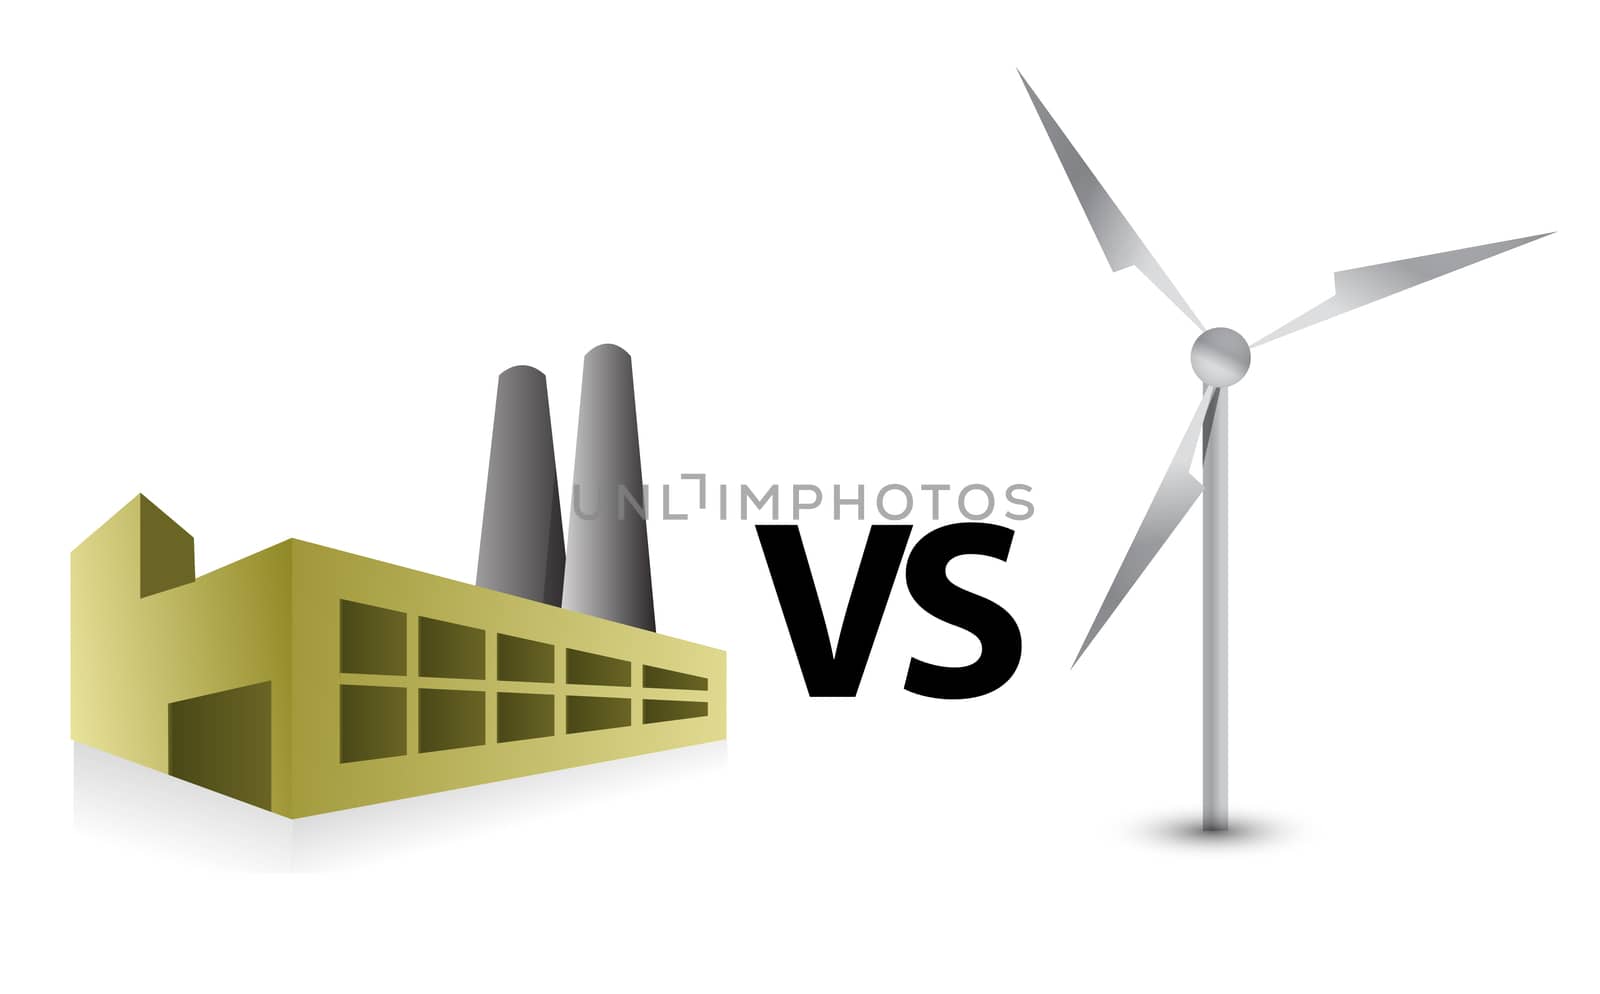 factory vs windmill energy illustration concept design by alexmillos